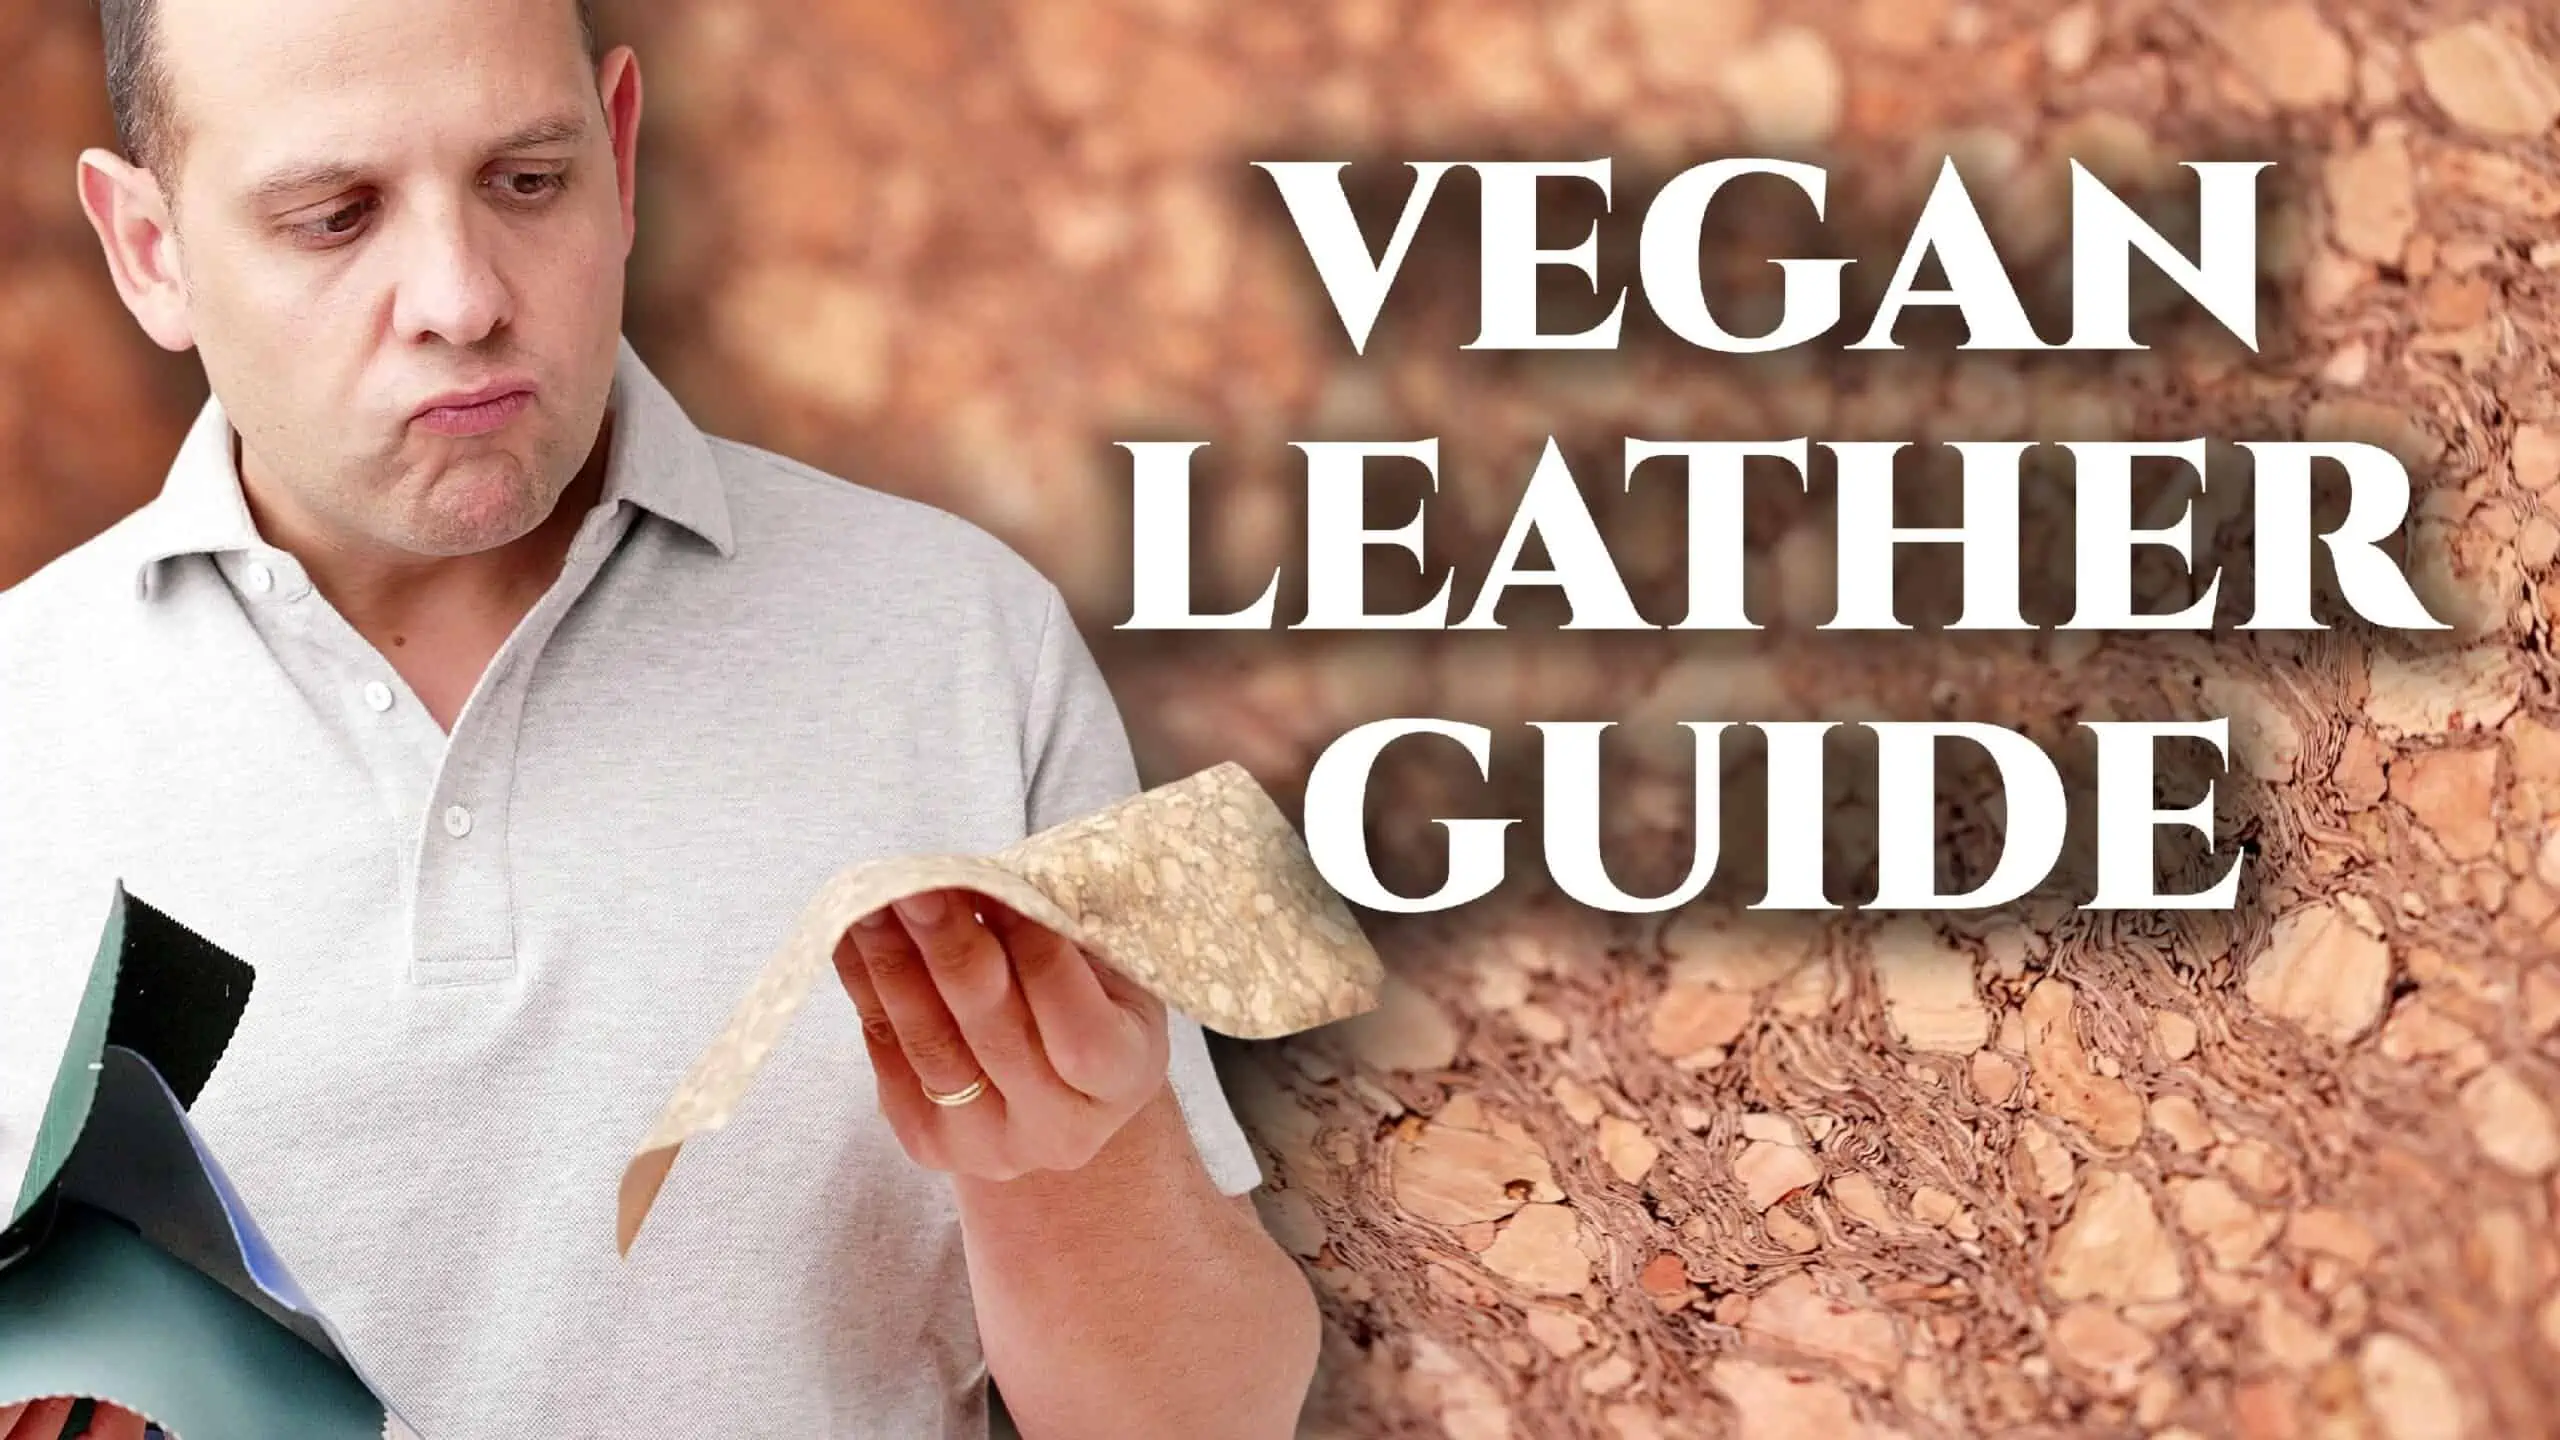 Is Vegan Leather Better?